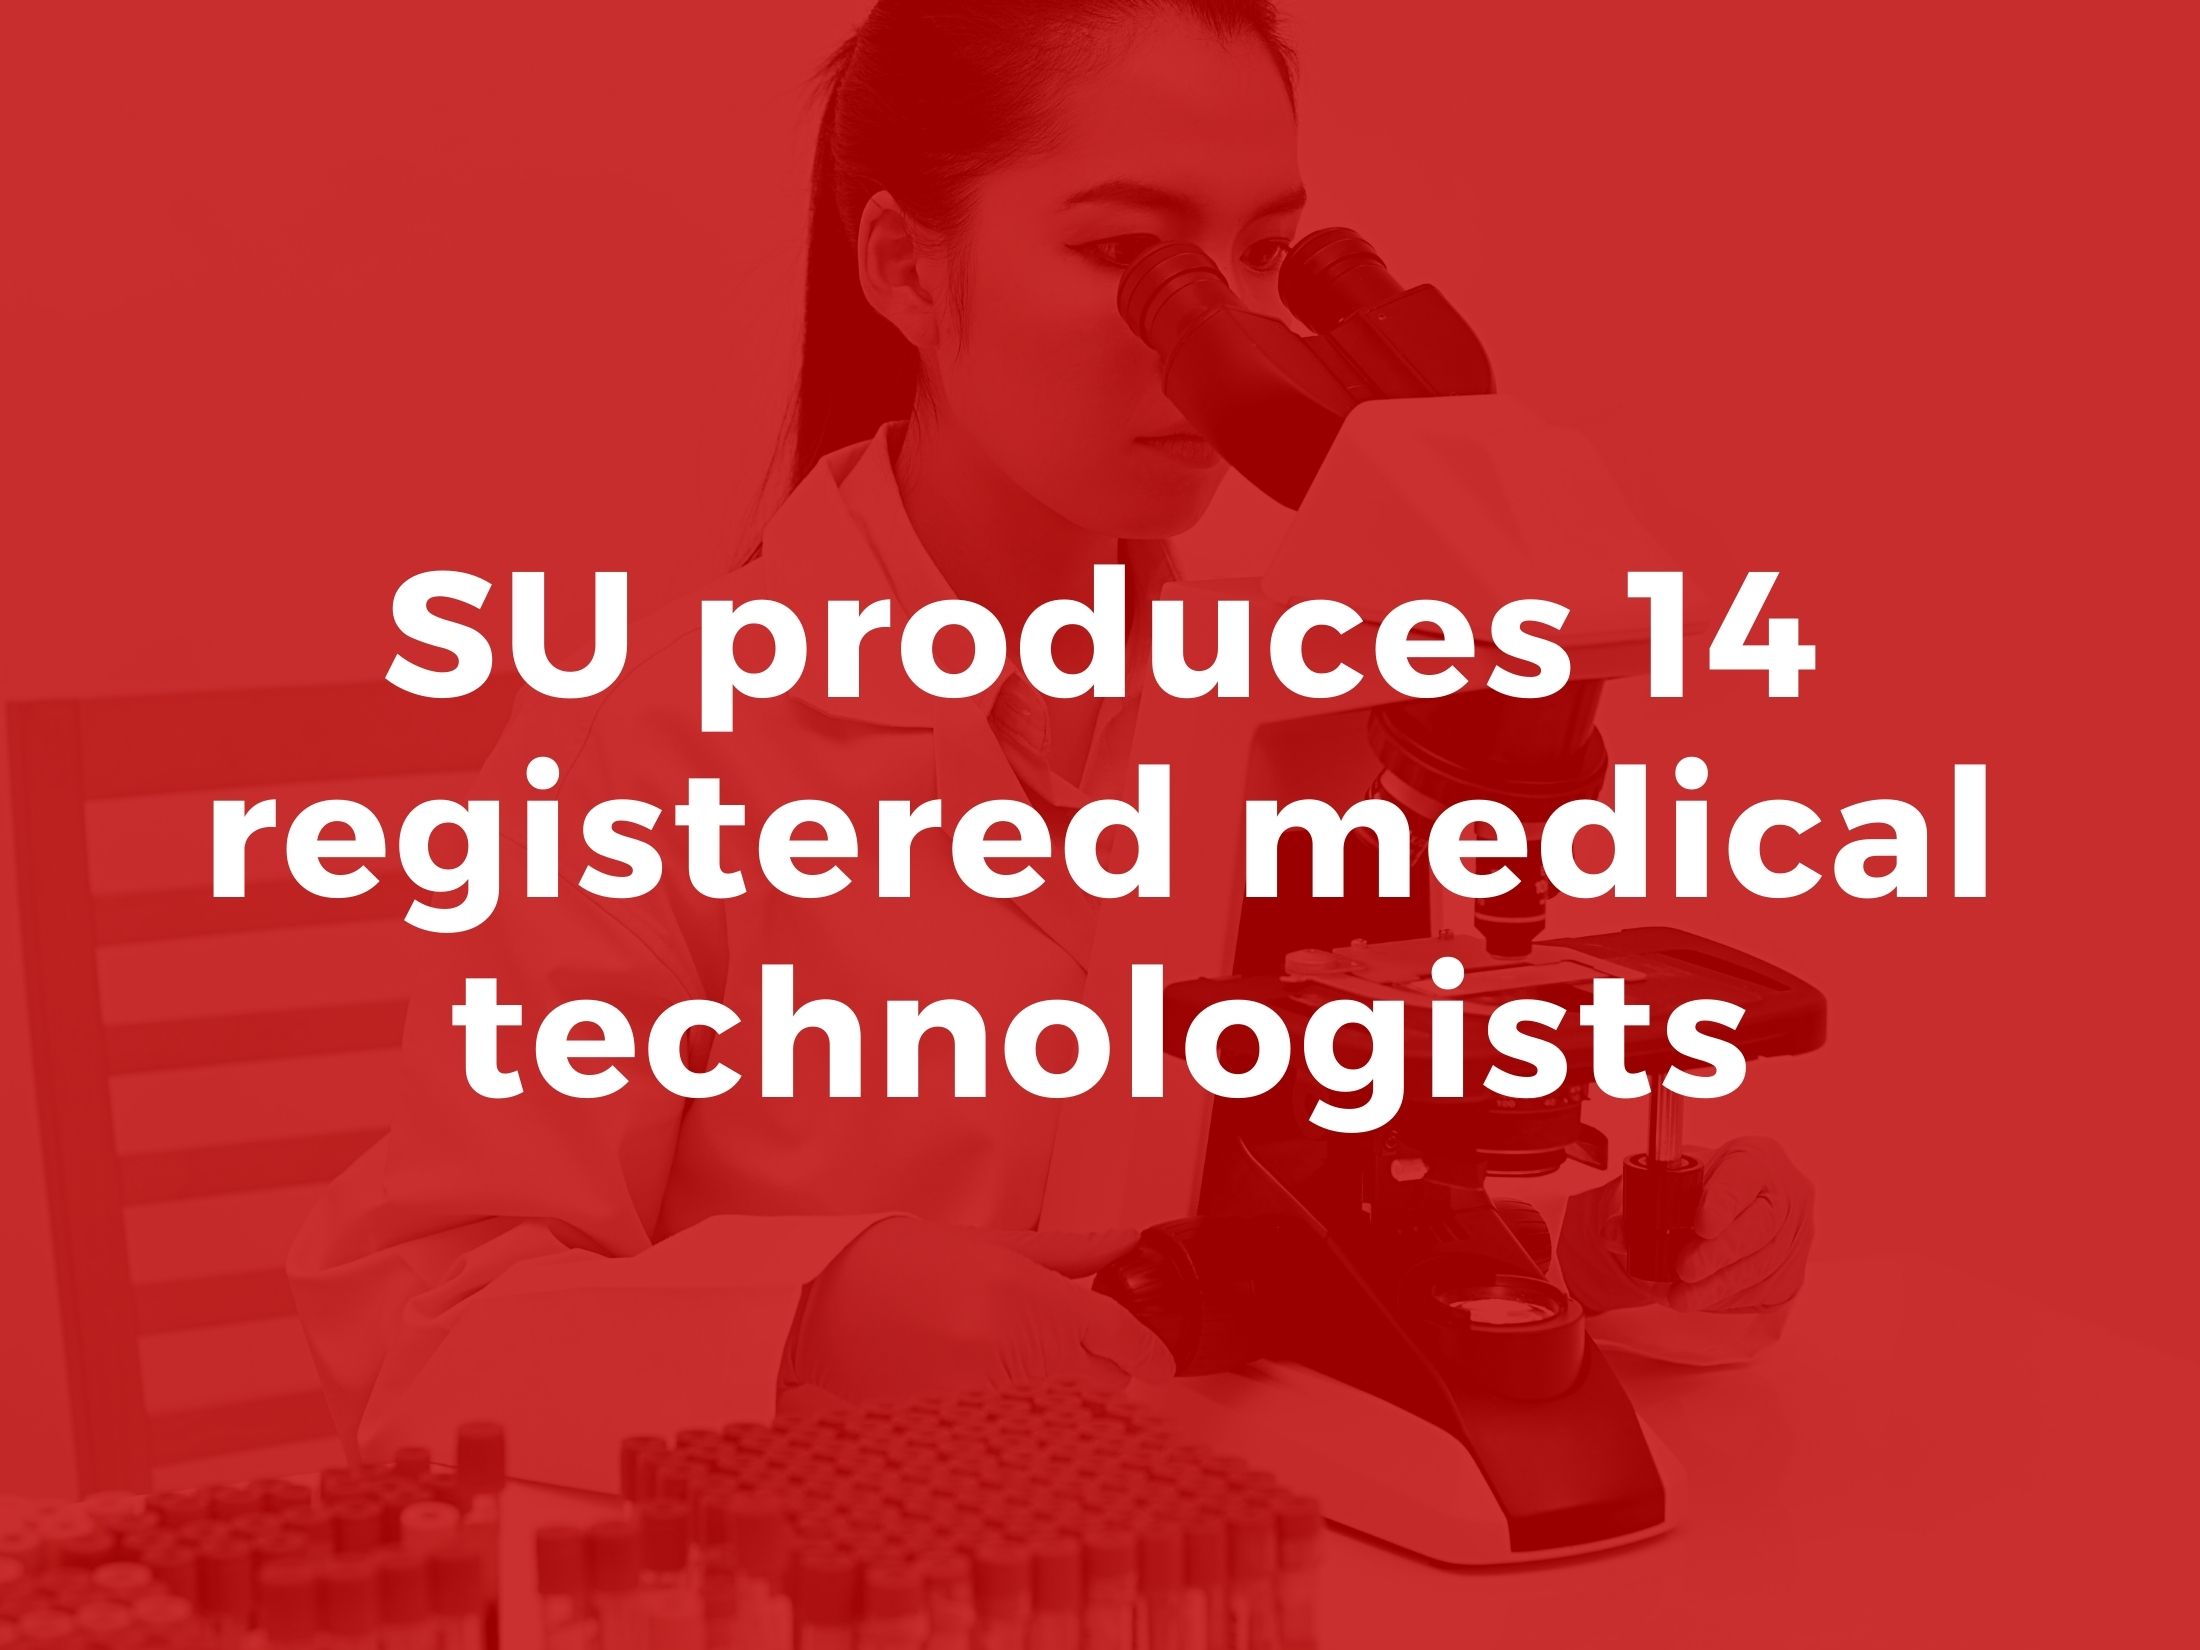 SU produces 14 registered medical technologists